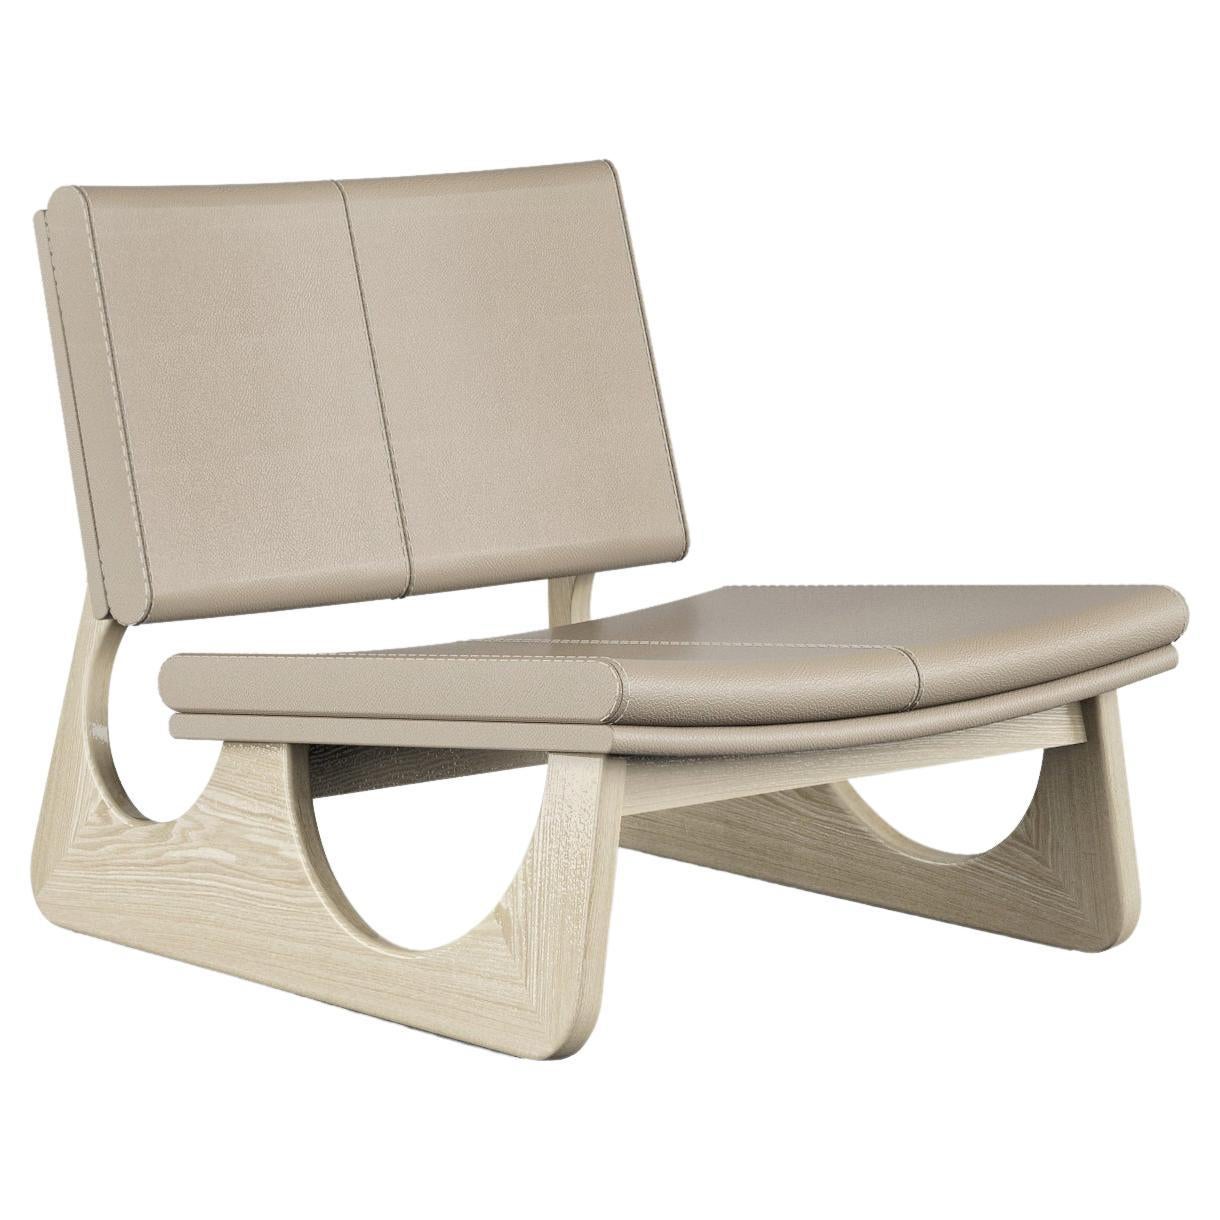 Sledge Lounge Chair For Sale